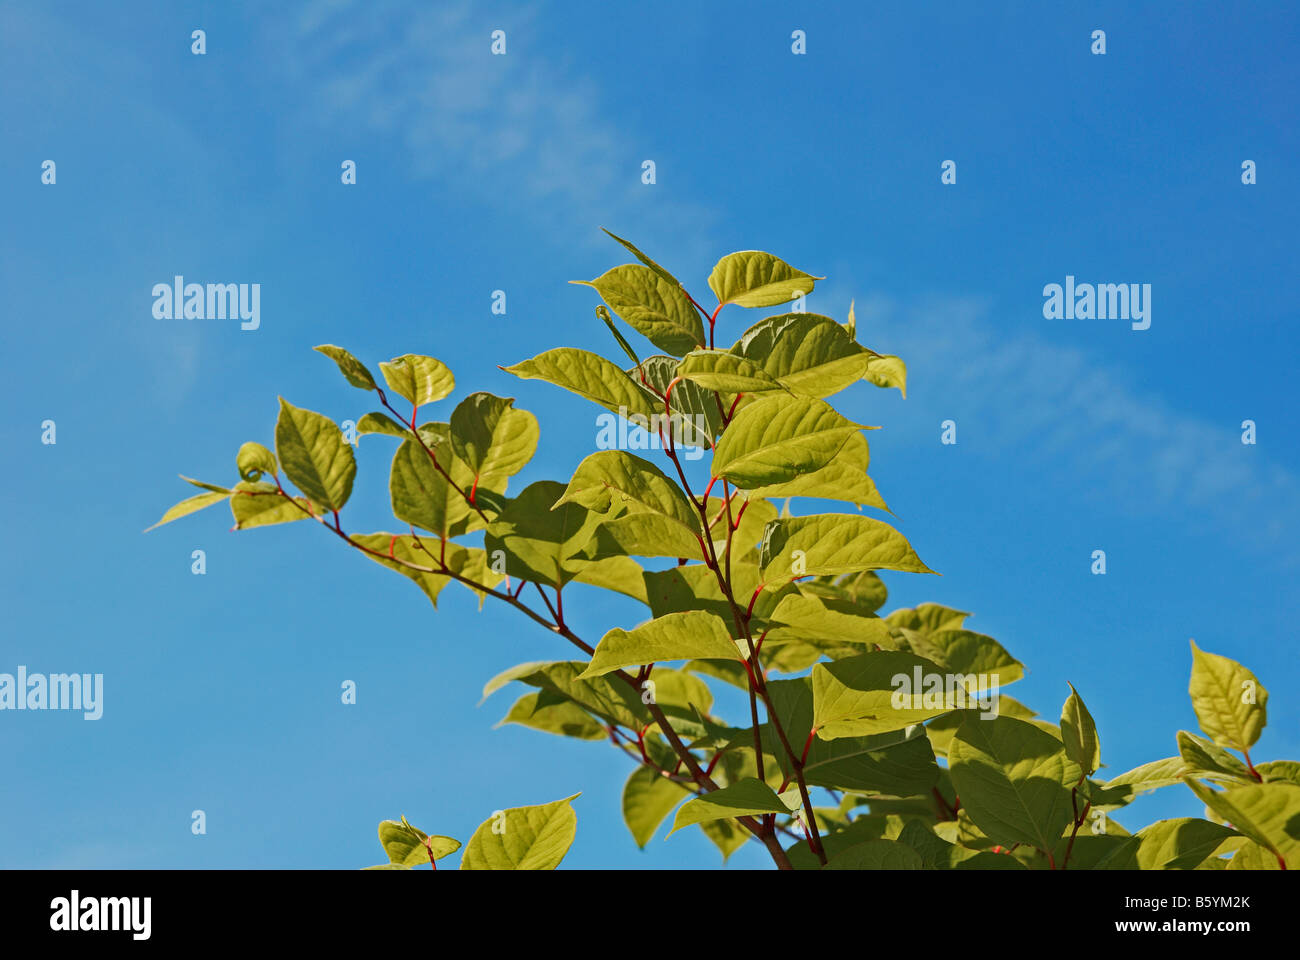 japanese knotweed against a clear blue sky Stock Photo